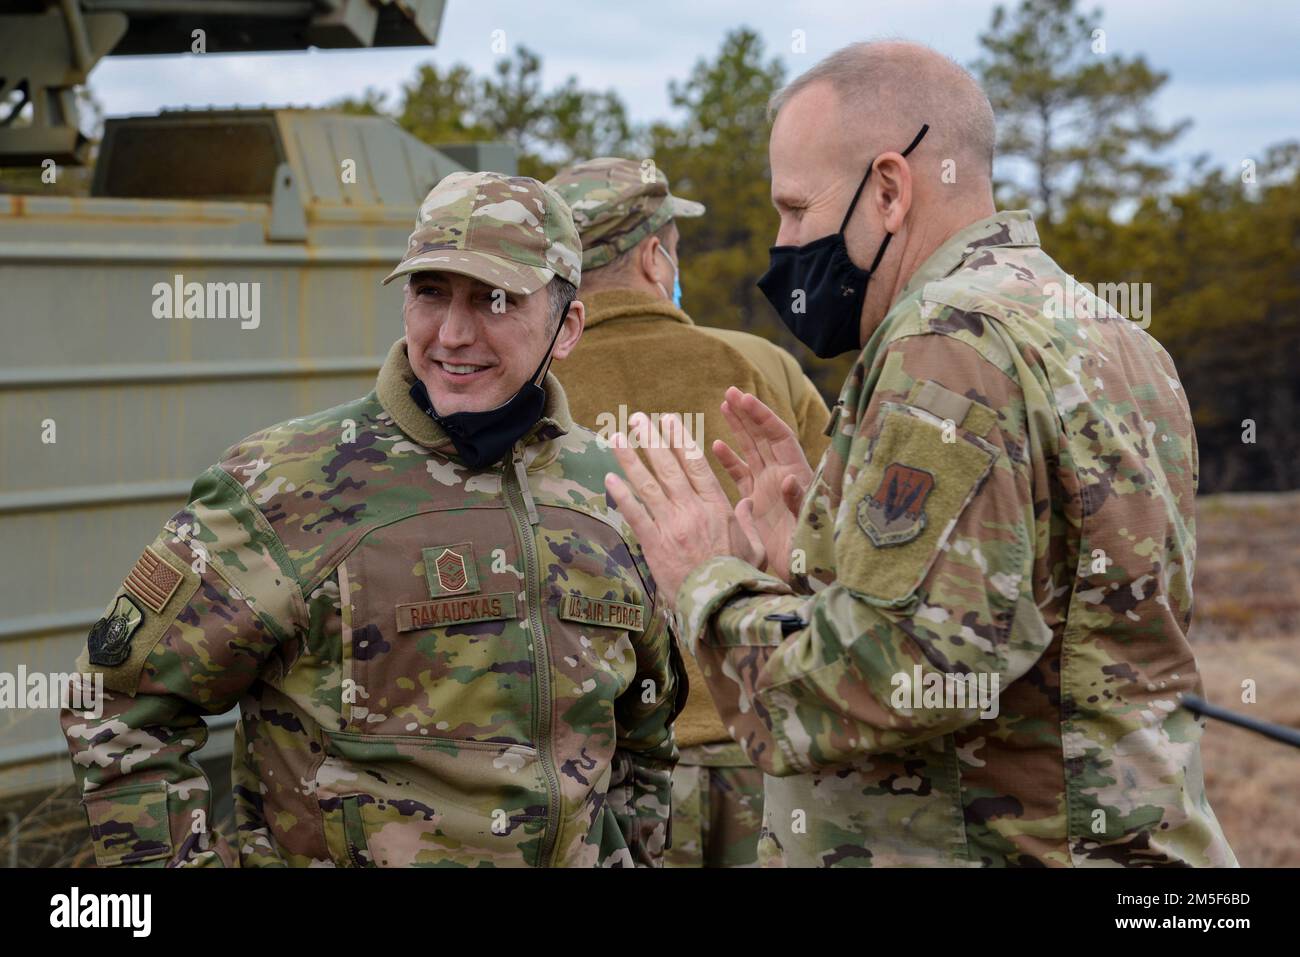 U.S. Air Force Chief Master Sgt. Michael J. Rakauckas, New Jersey Air National Guard state command chief, left, discusses decommissioned military vehicles repurposed for target practice with Master Sgt. Steven Gaskill, Warren Grove Range superintendent, right, March 10, 2022, at the Warren Grove Gunnery Range, Warren Grove, New Jersey. Brig. Gen. Patrick M. Kennedy, Assistant Adjutant General-Air, New Jersey National Guard, and Rakauckas took a tour of the Warren Grove Gunnery Range and observed A-10 Thunderbolt IIs training during their visit. Stock Photo